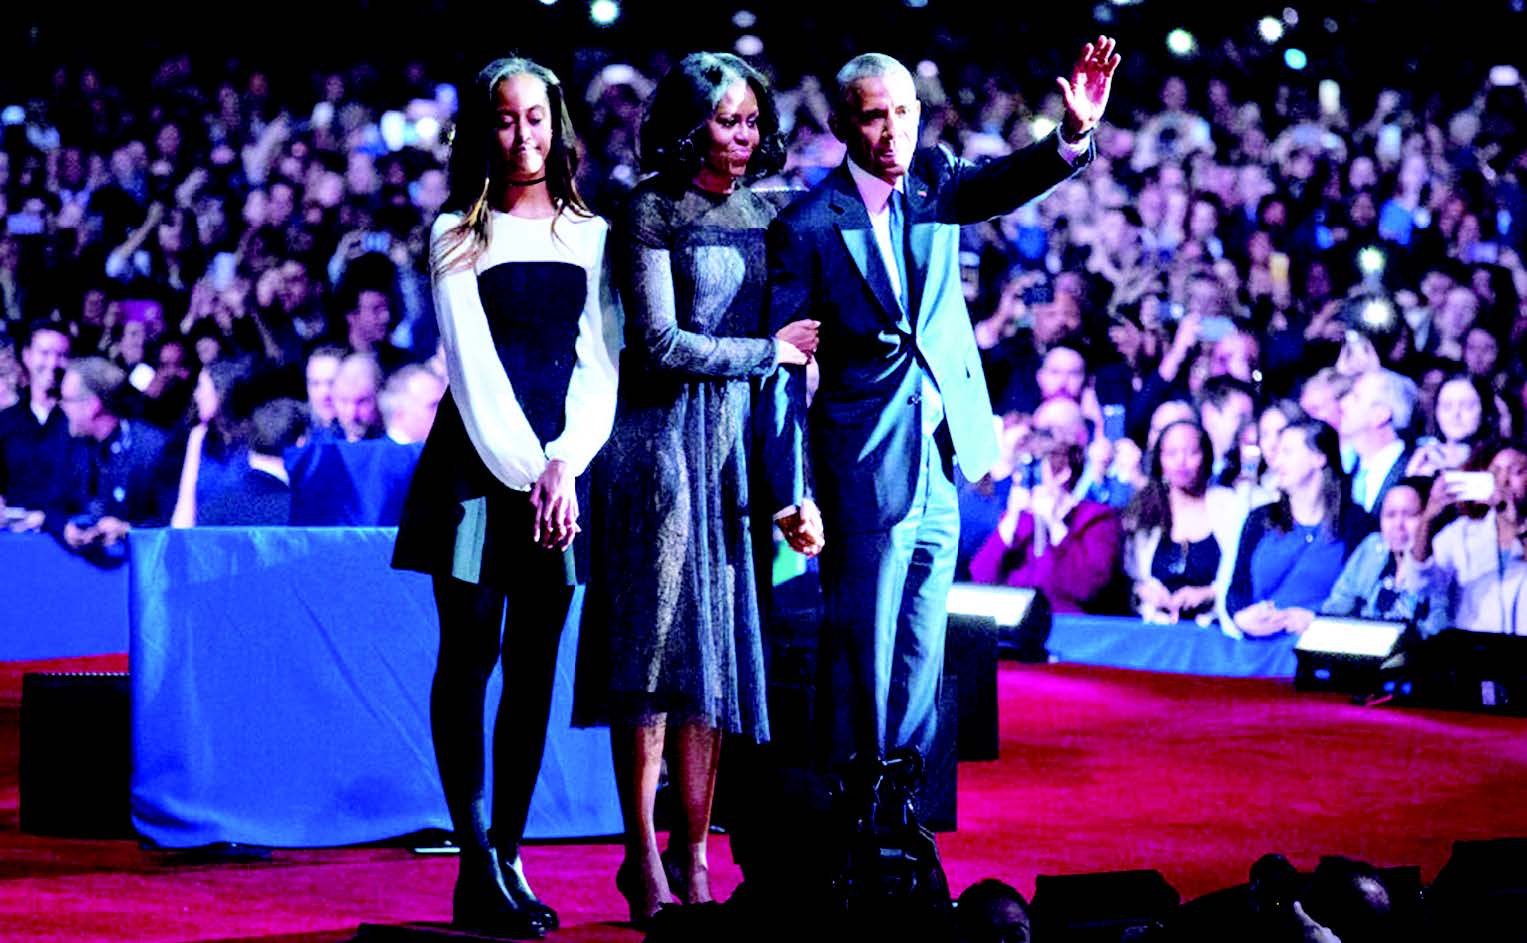 An emotional President Barack Obama with the First Lady Michelle Obama and their daughter Malia Obama at his farewell address to the nation from McCormick Place in Chicago, January 10, Obama dwelt on the challenges before America's democracy and sought to give a message of hope to American. "Let's be vigilant. But not afraid", he said.